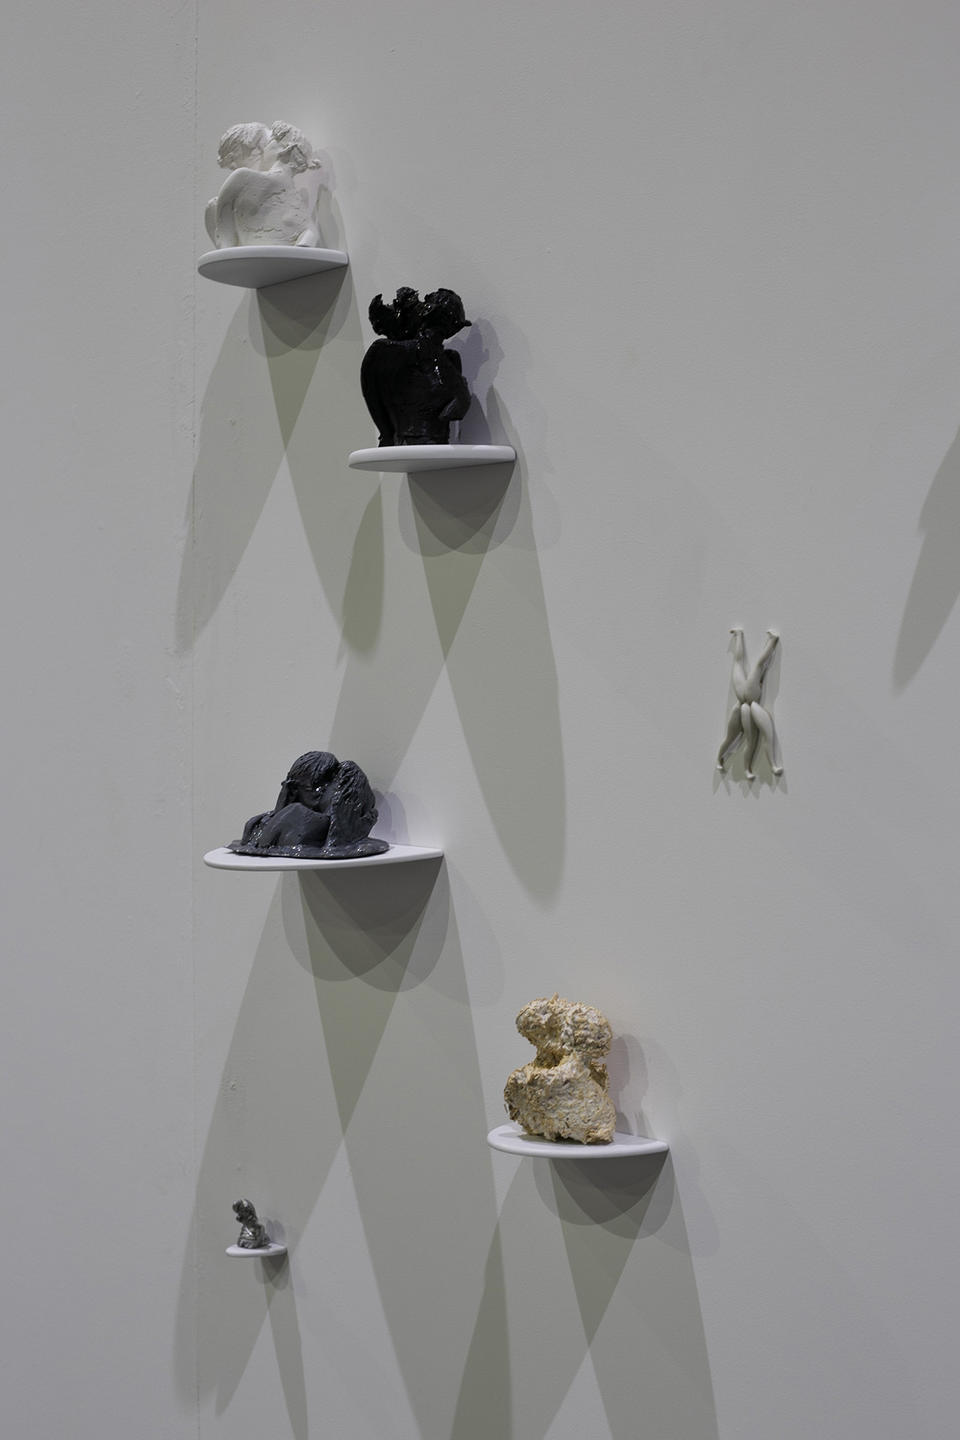 A grouping of sculptures of various materials sitting on individual shelves